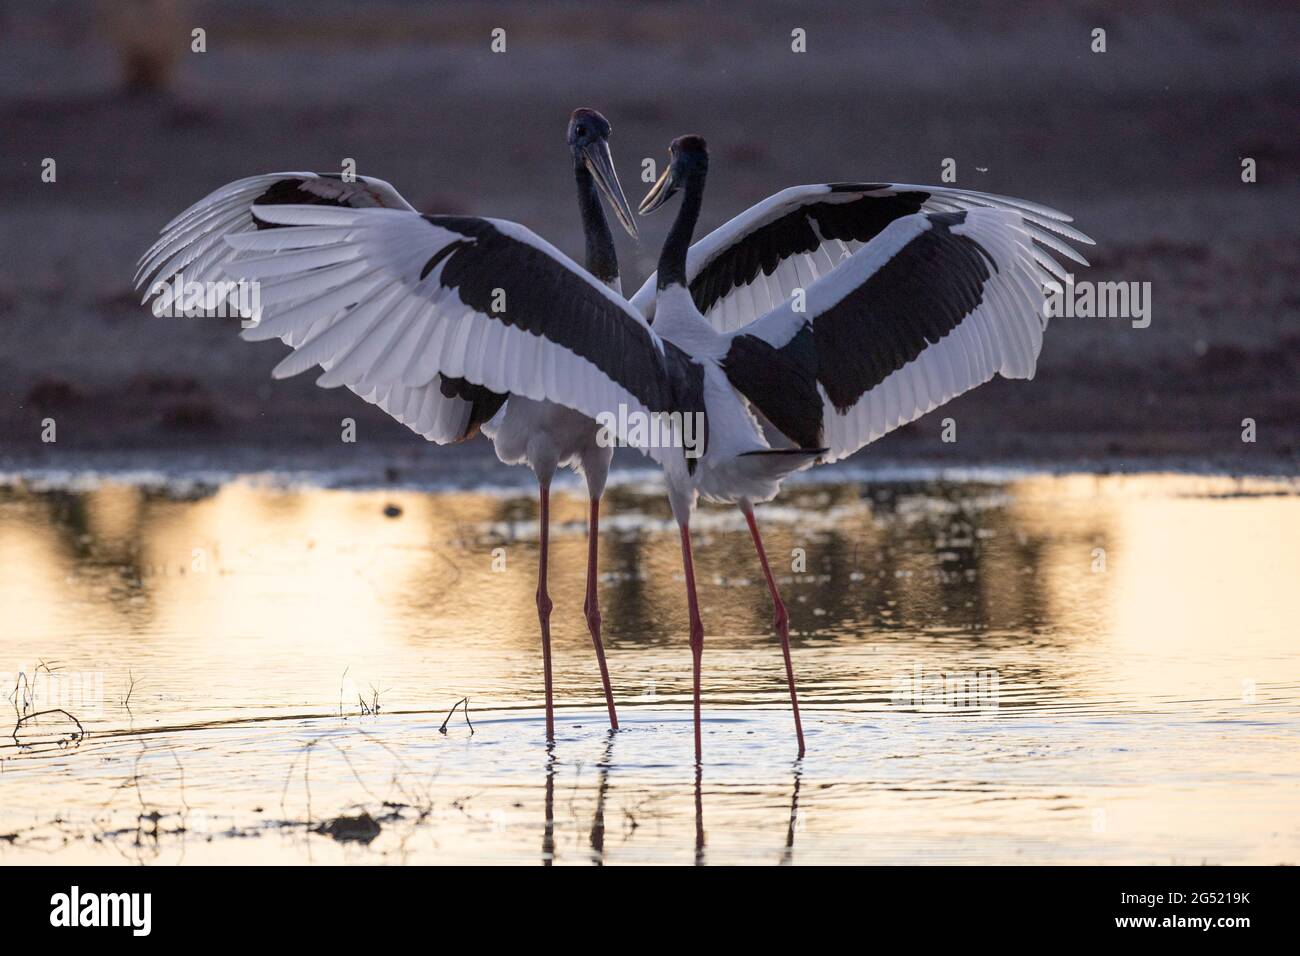 Jabiru storks courting with wings spread wide in far northern Australia. Stock Photo